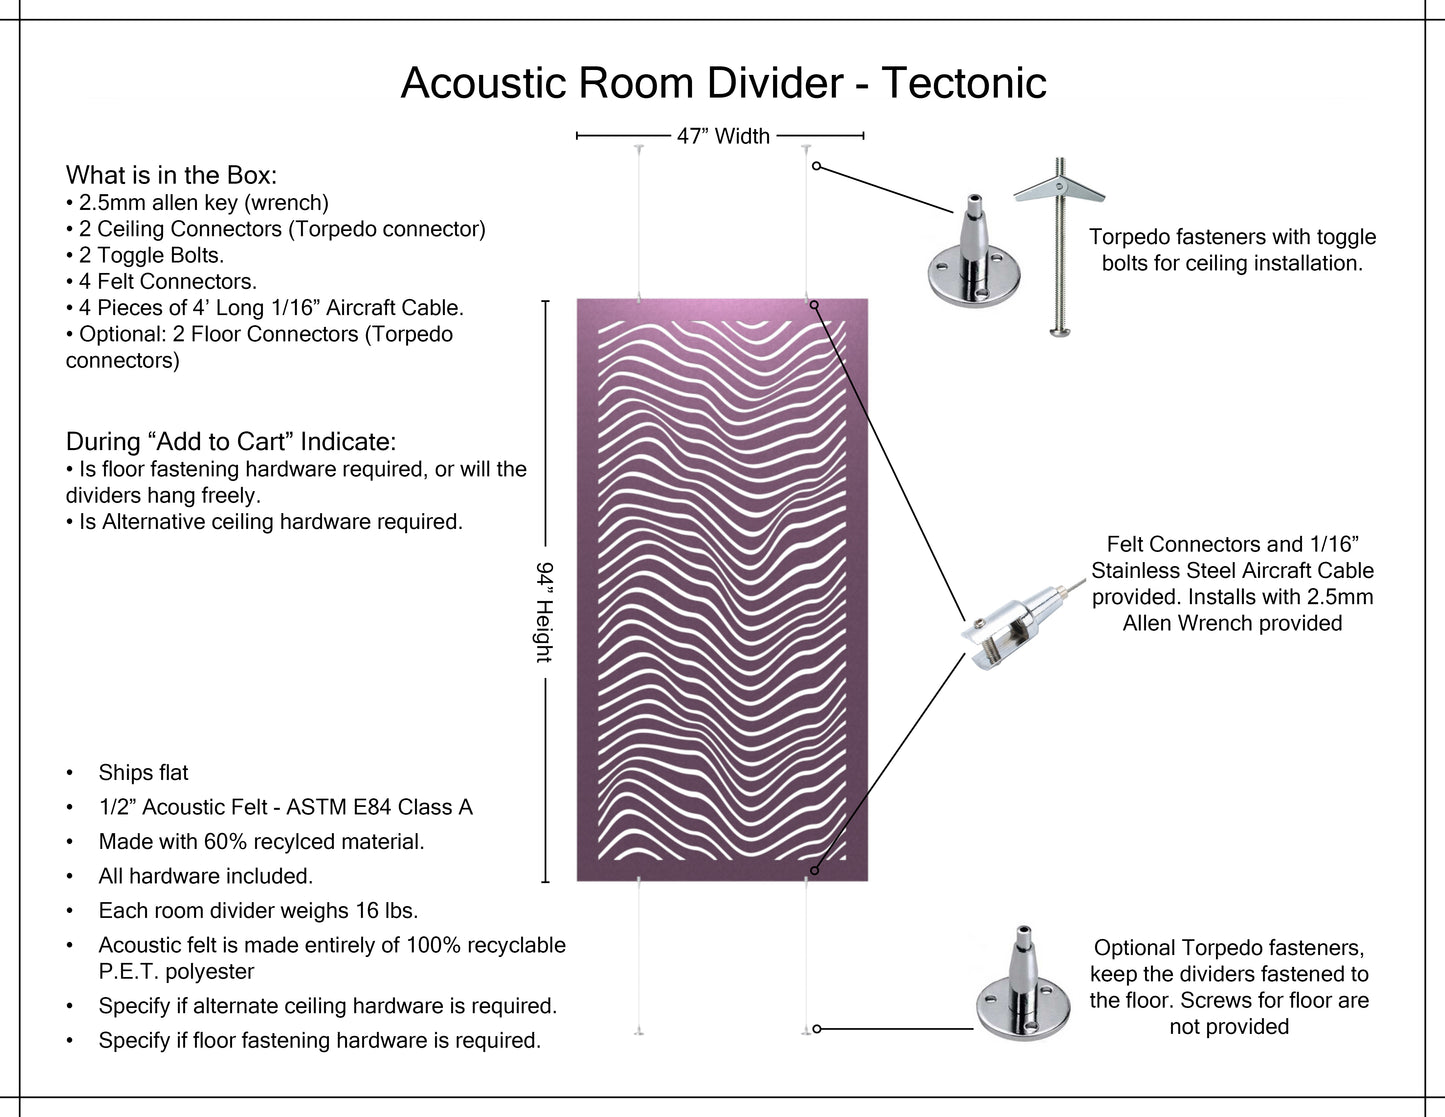 4x8 Acoustic Room Divider - Tectonic